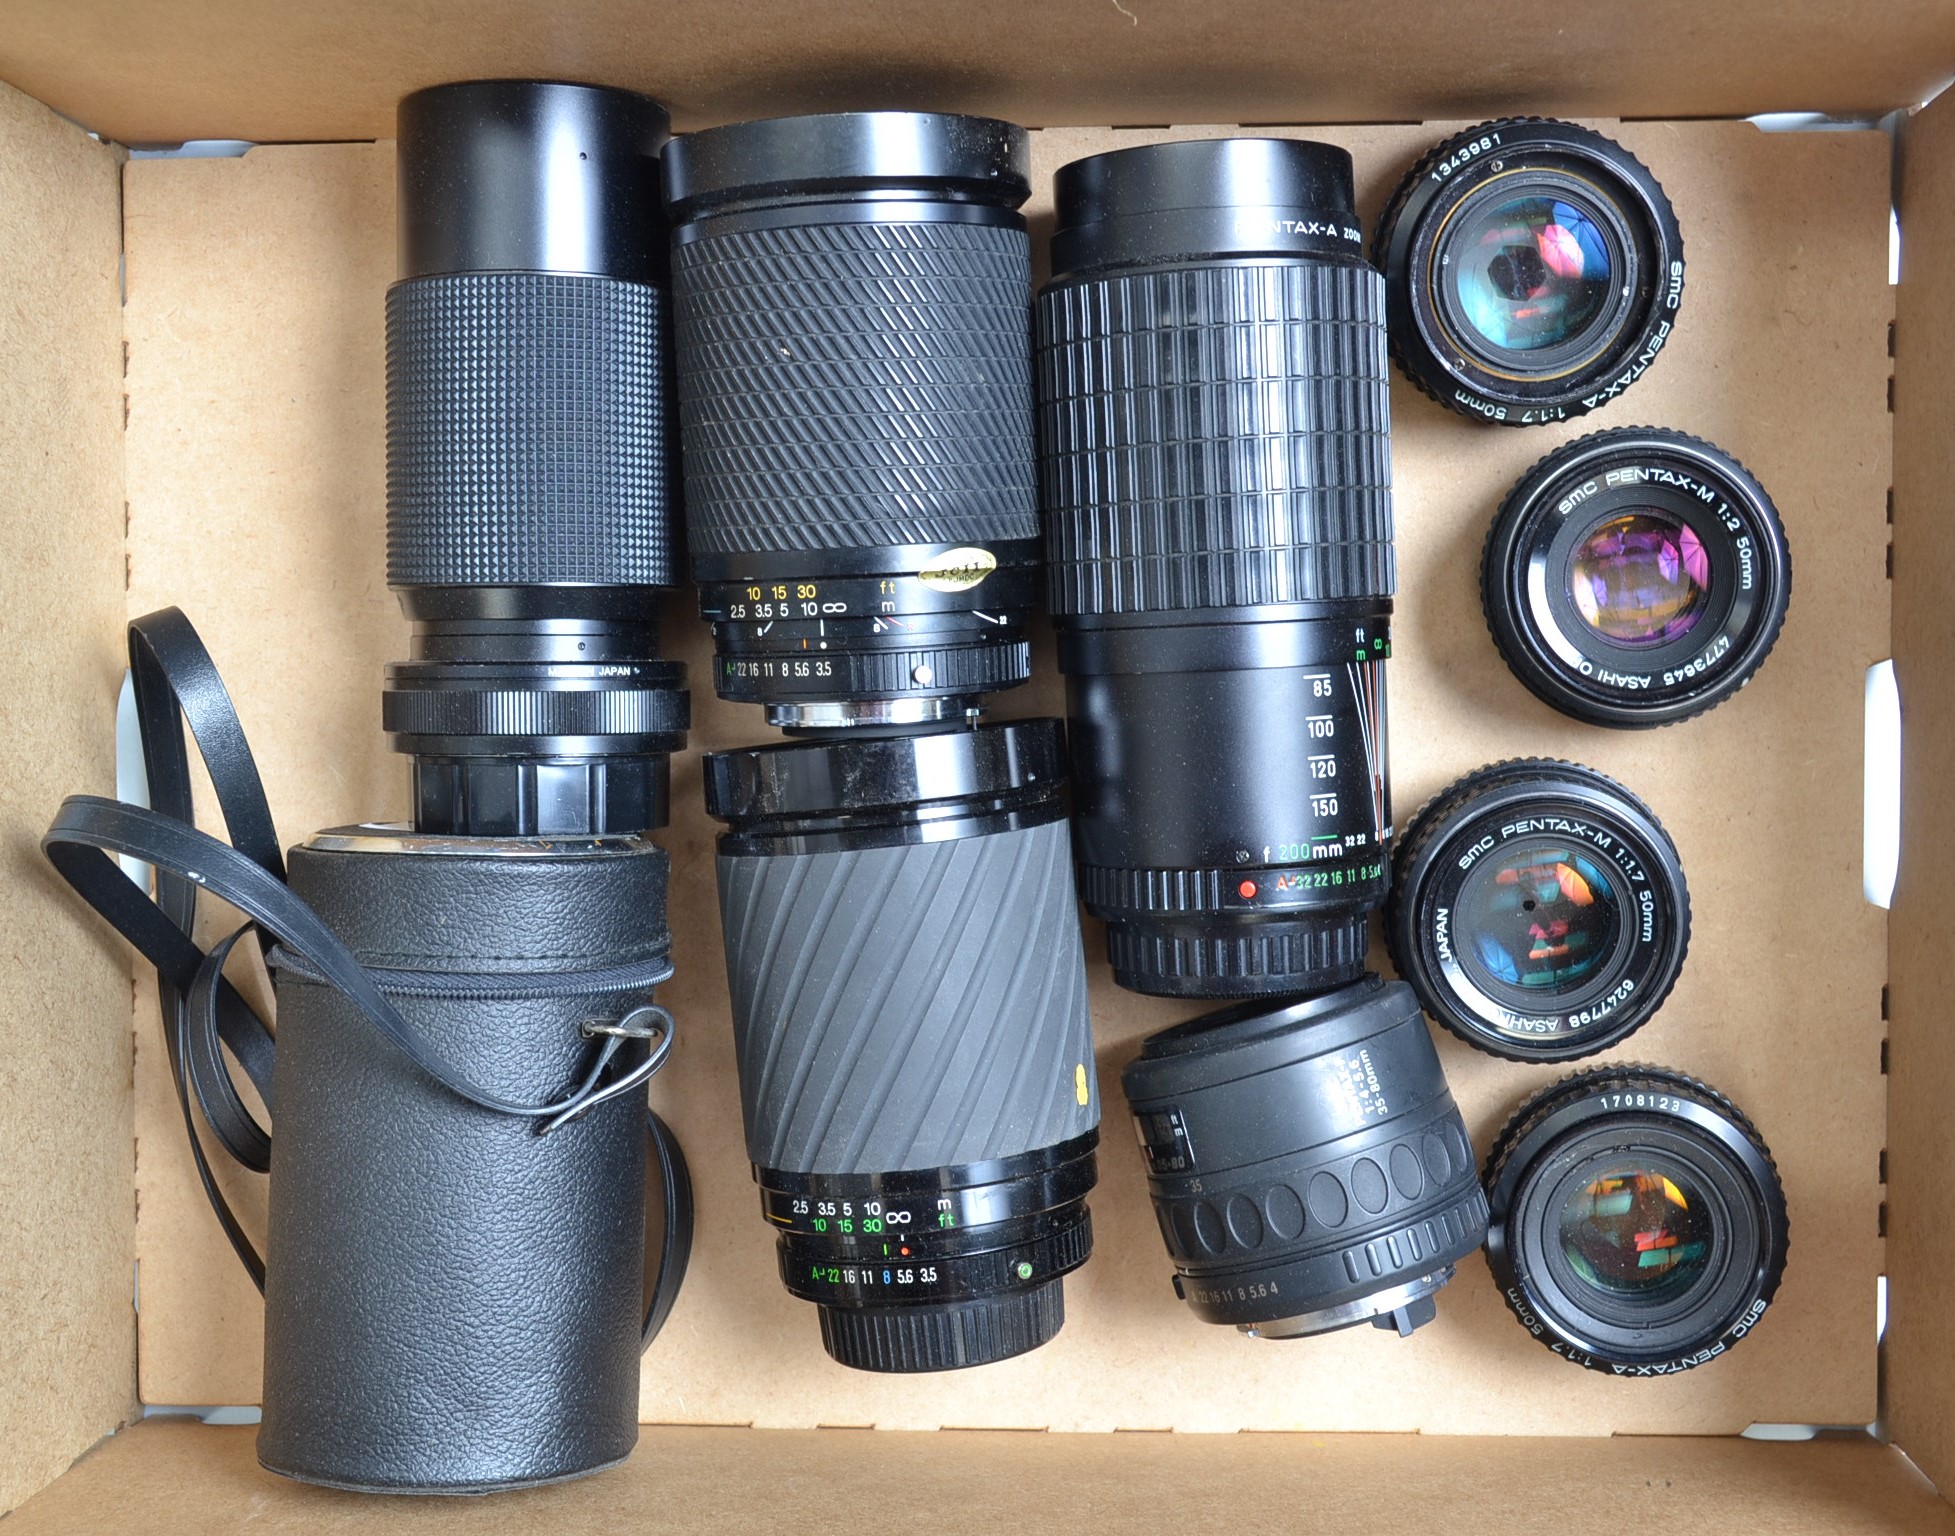 A Tray of Pentax Lenses, including SMC 50mm f/1.7 (3), 50mm f/2, A zoom 70-200mm f/4, Takumar-A 28-